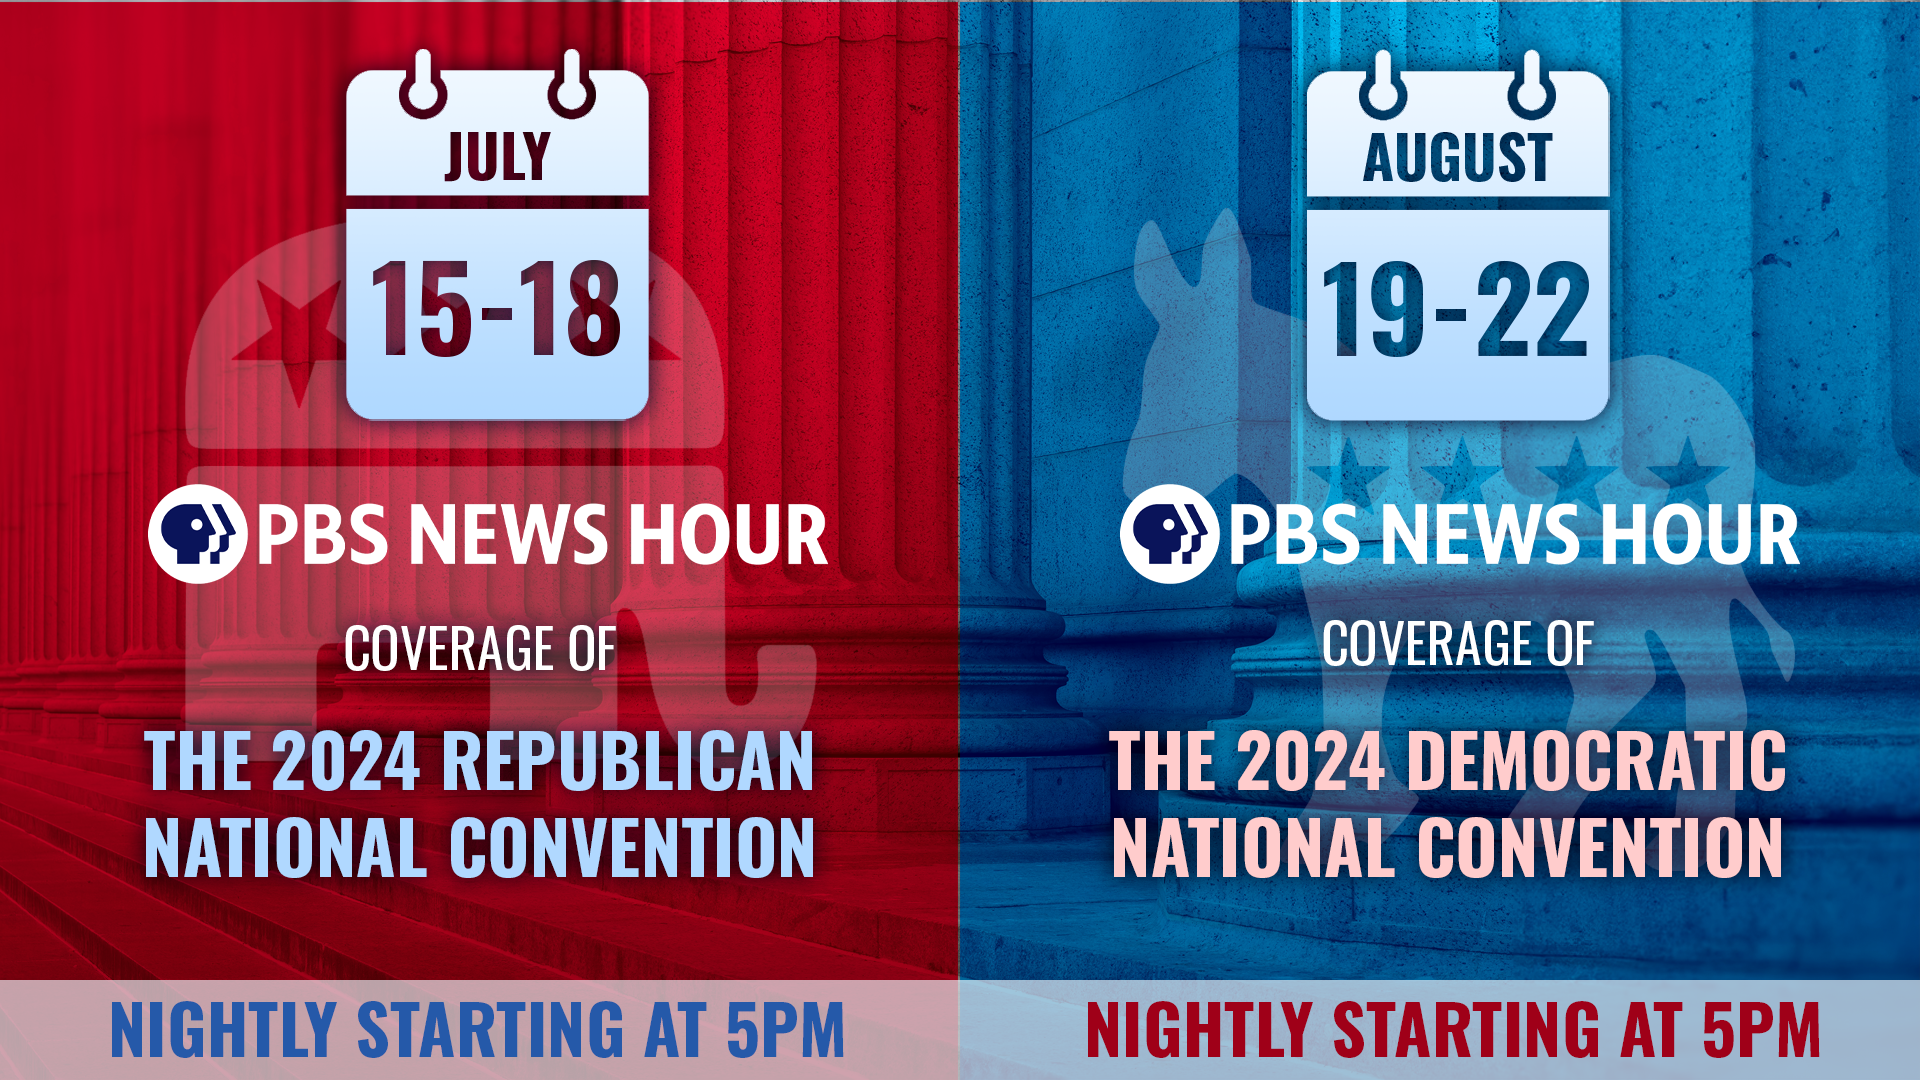 A graphic reading: July 15-18 PBS News Hour coverage of the 2024 Republican National Convention and August 19-22 News Hour coverage of the 2024 Democratic National Convention